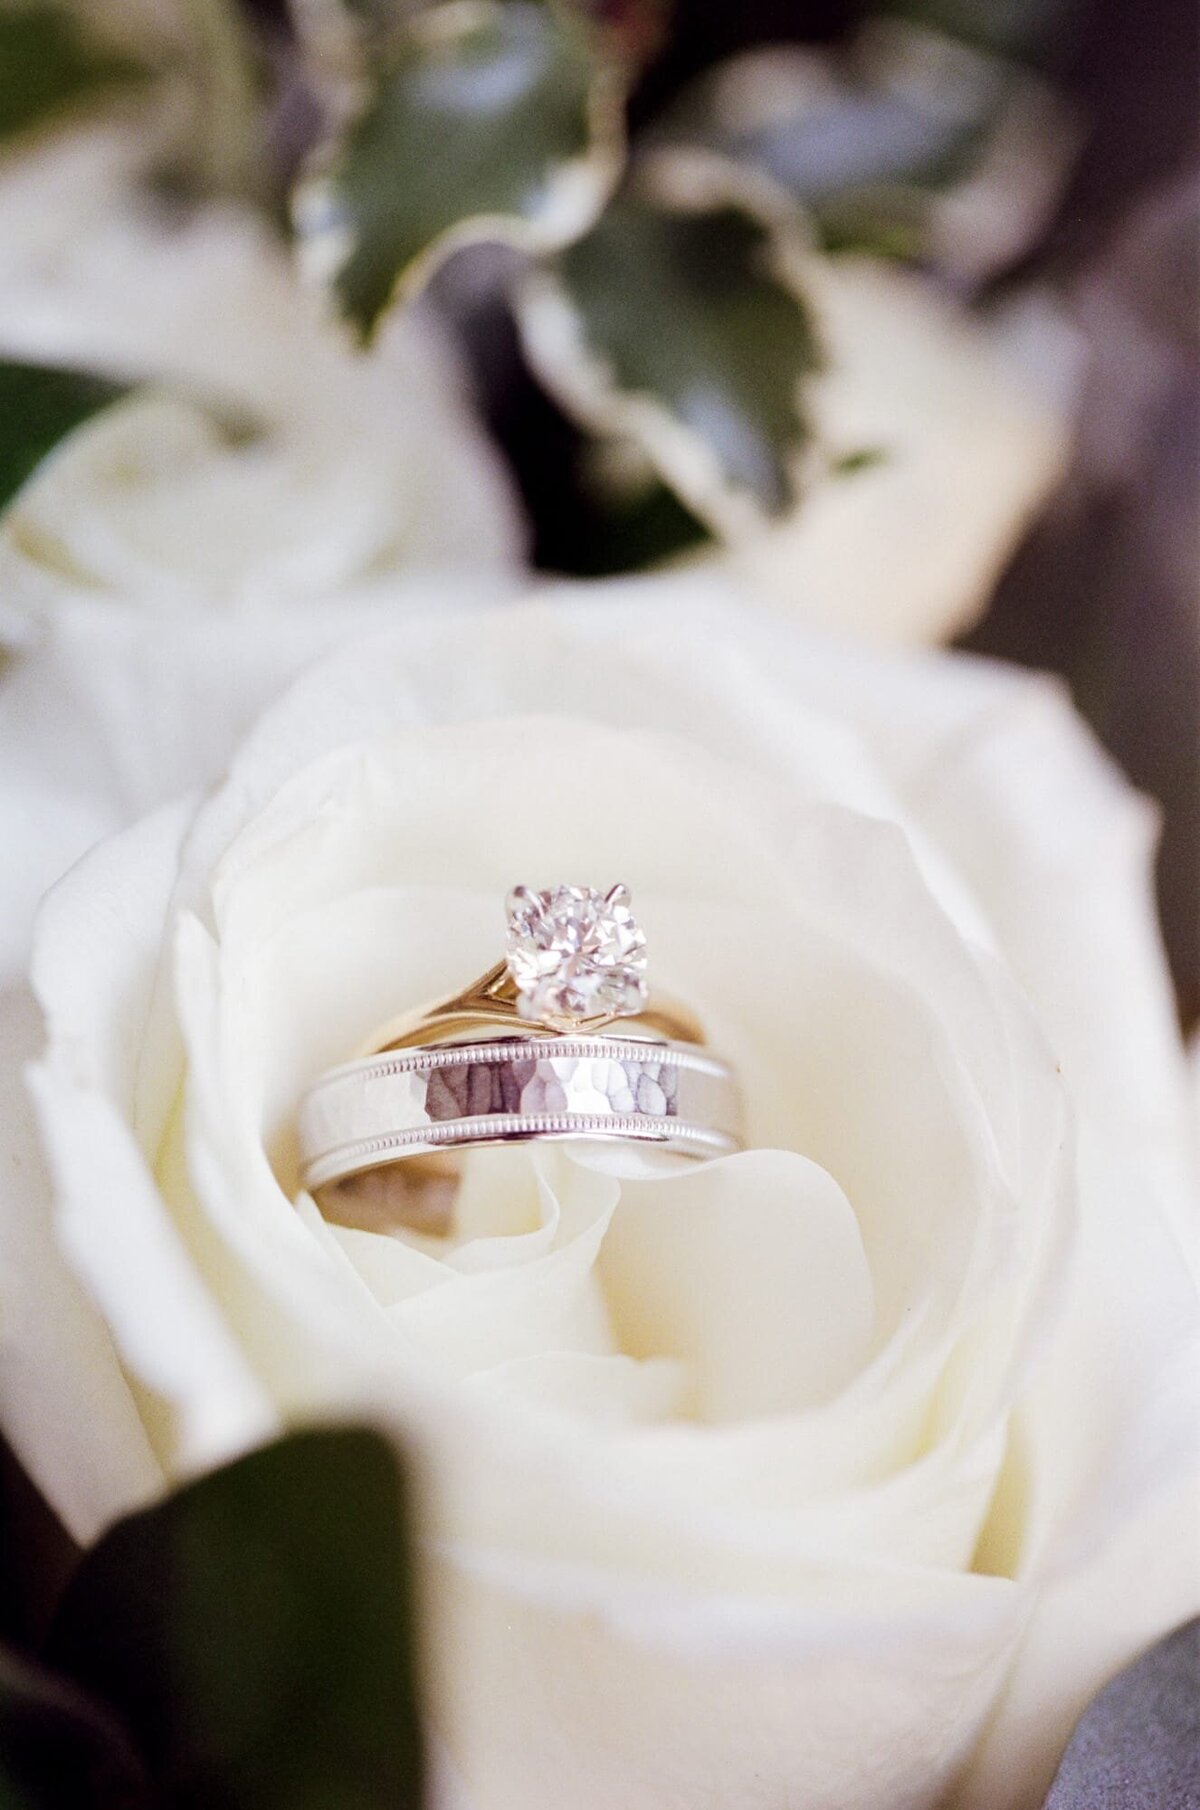 Beautifully-cut diamond made into a diamond ring and placed on top of a white rose bulb.